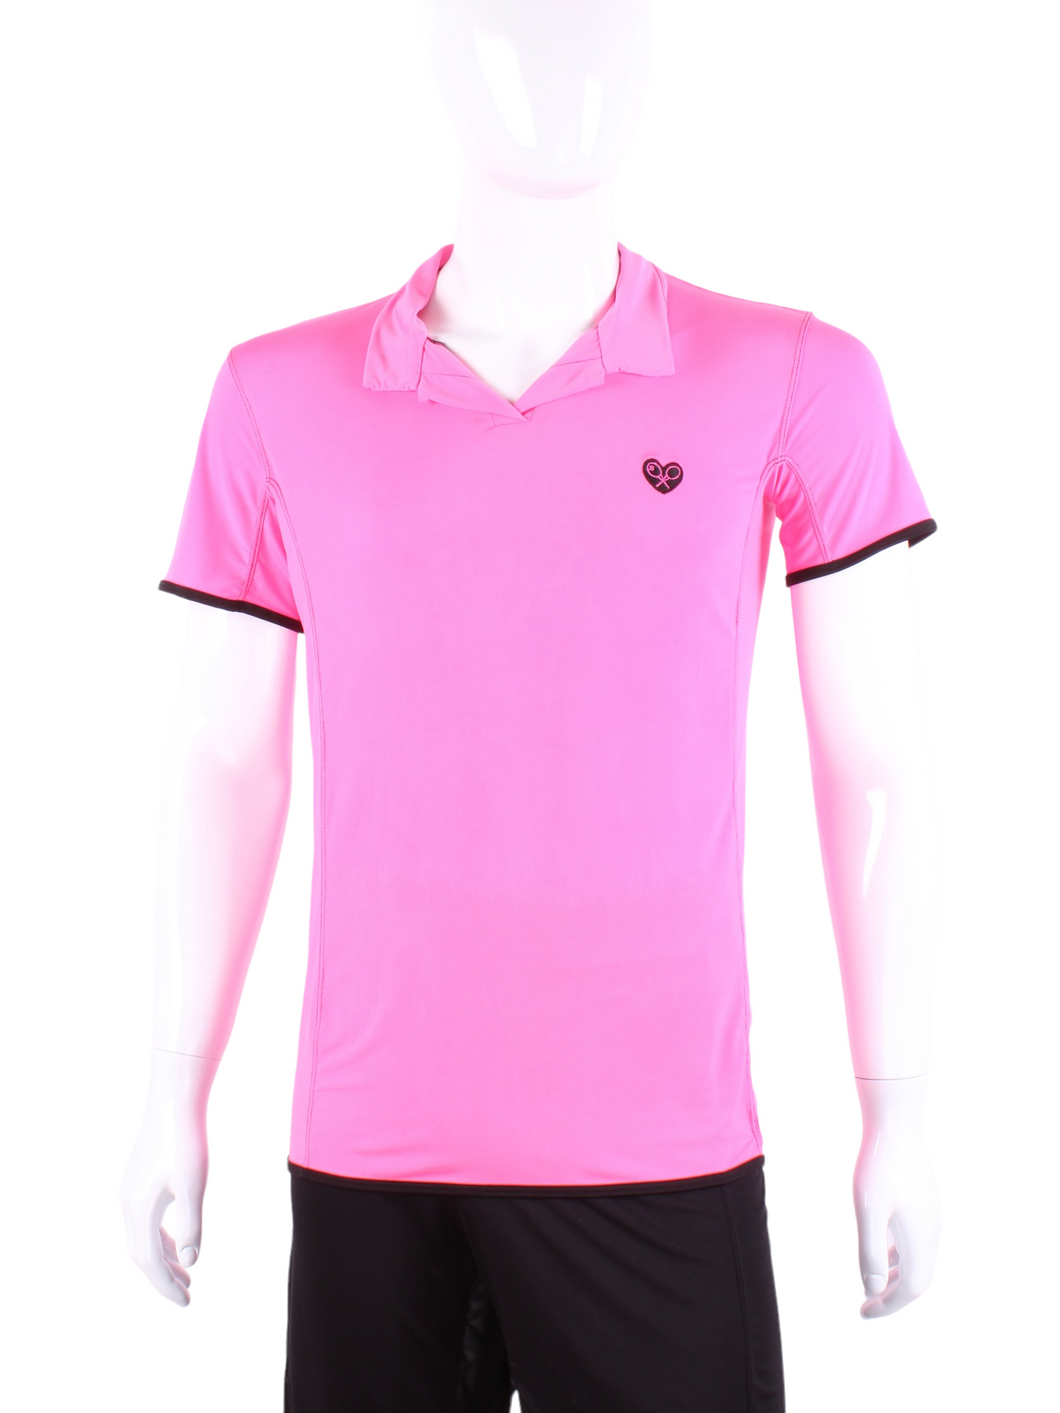 This is our limited edition Men’s Polo Pink.   This piece has a silky and soft fabric.   We make these in very small quantities - by design.  Unique.  Luxurious.  Comfortable.  Cool.  Fun.